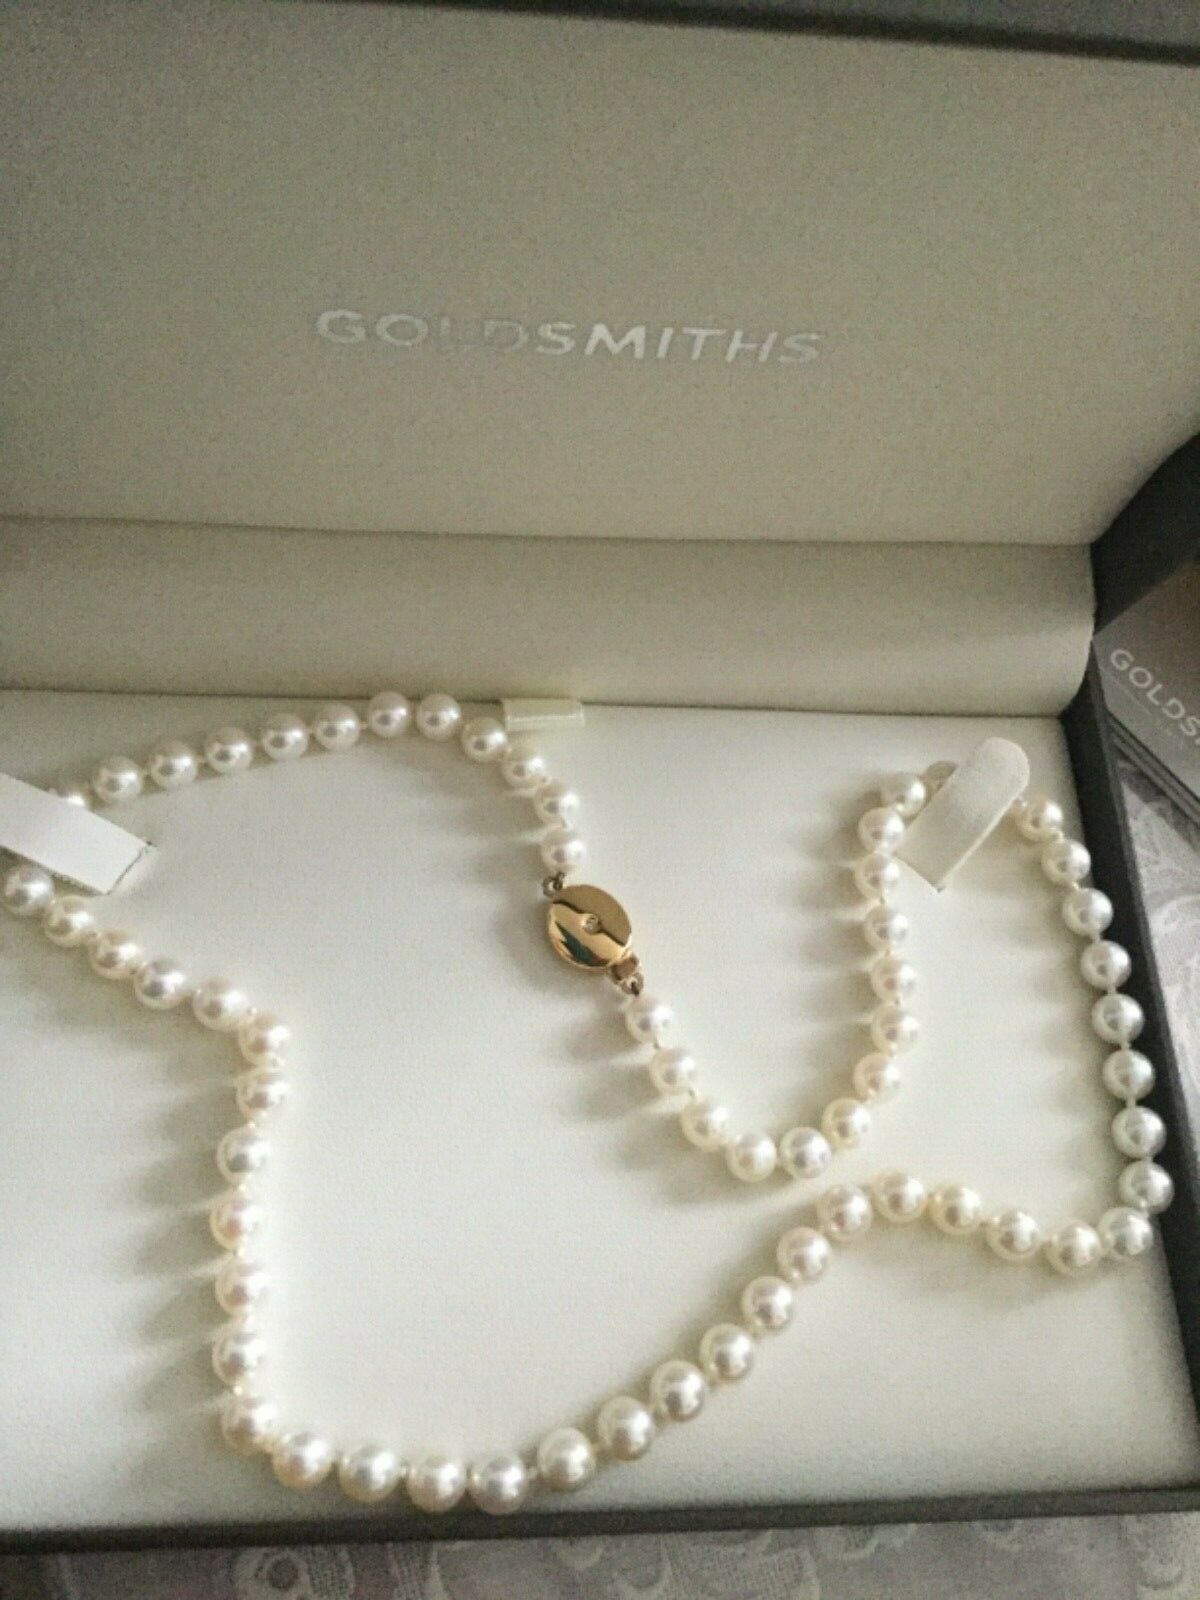 Goldsmith Pearl Necklace with 18ct gold and diamond clasp - Image 4 of 6